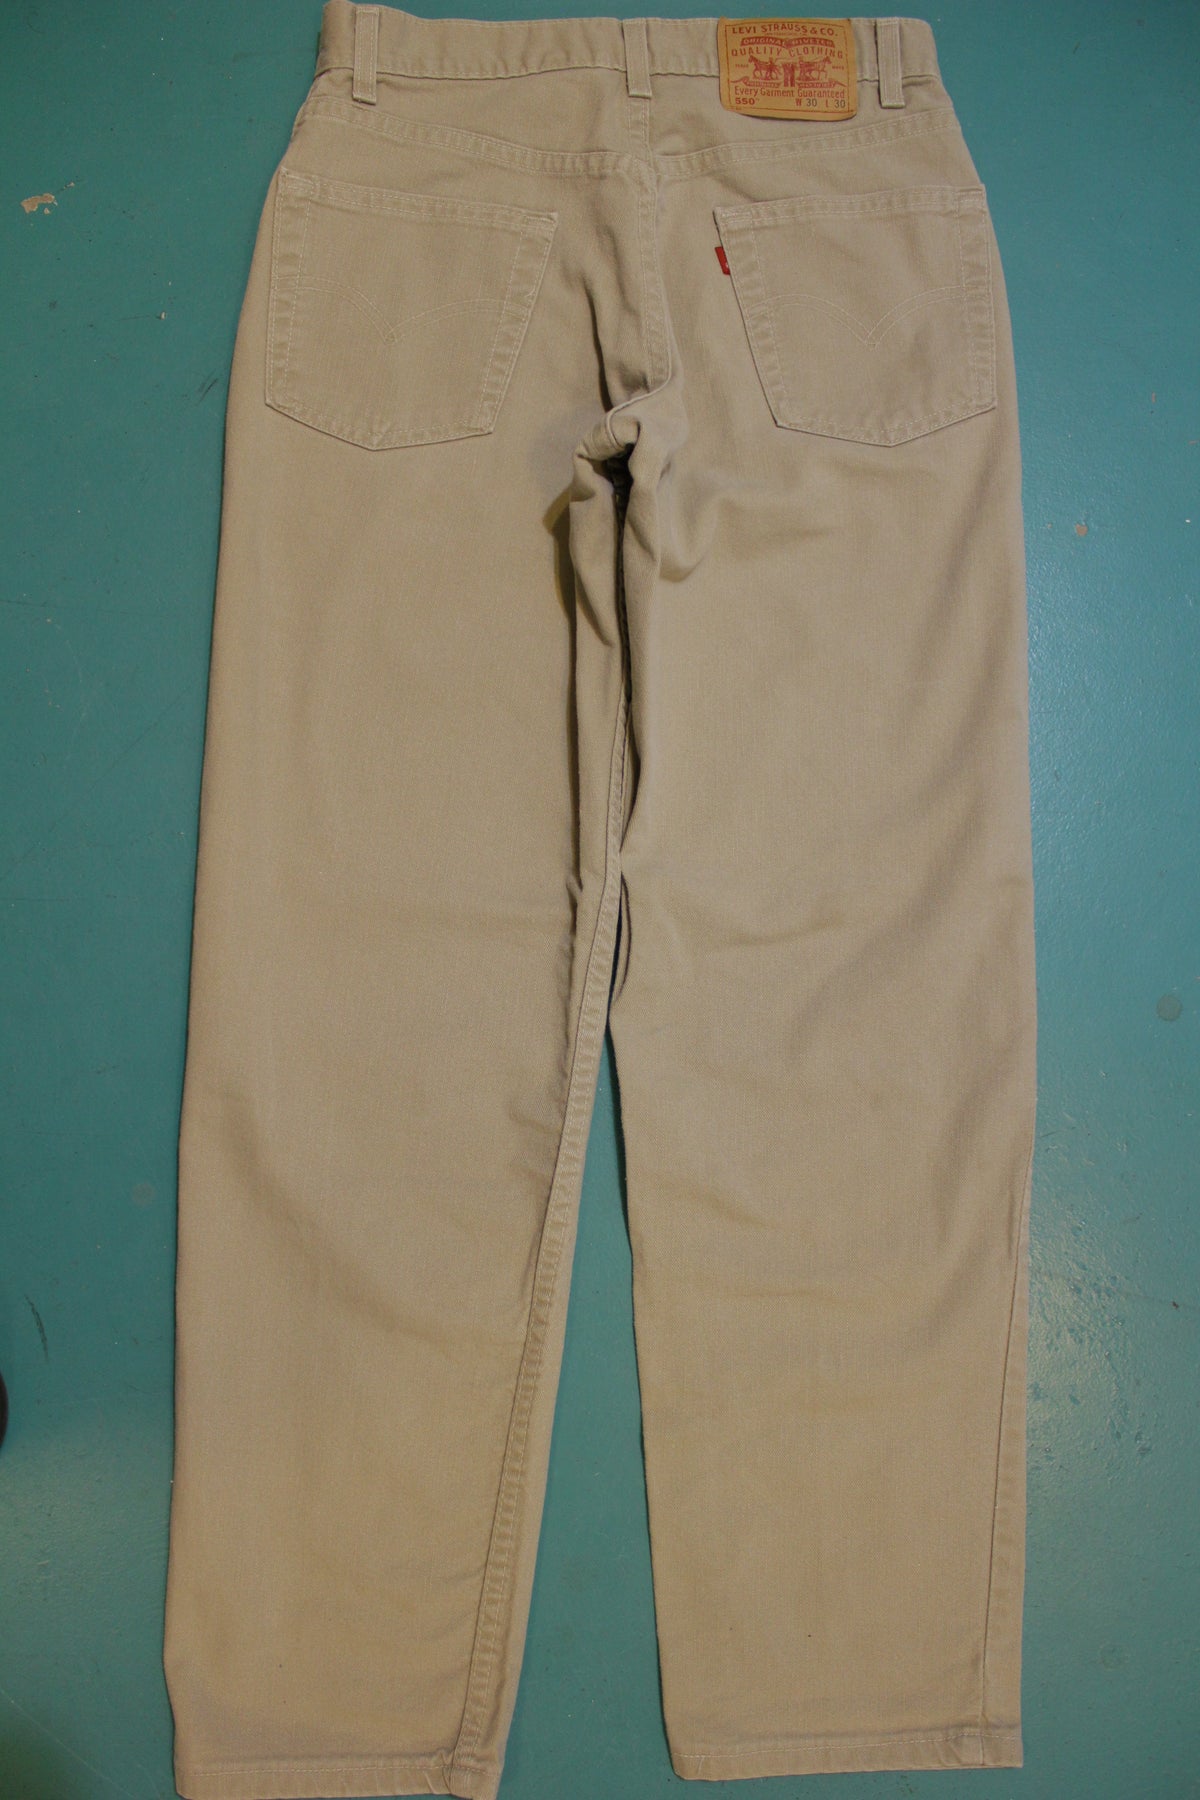 Levis Khaki 550 Made in USA Jeans Vintage 1990's Mint Denim One Wash